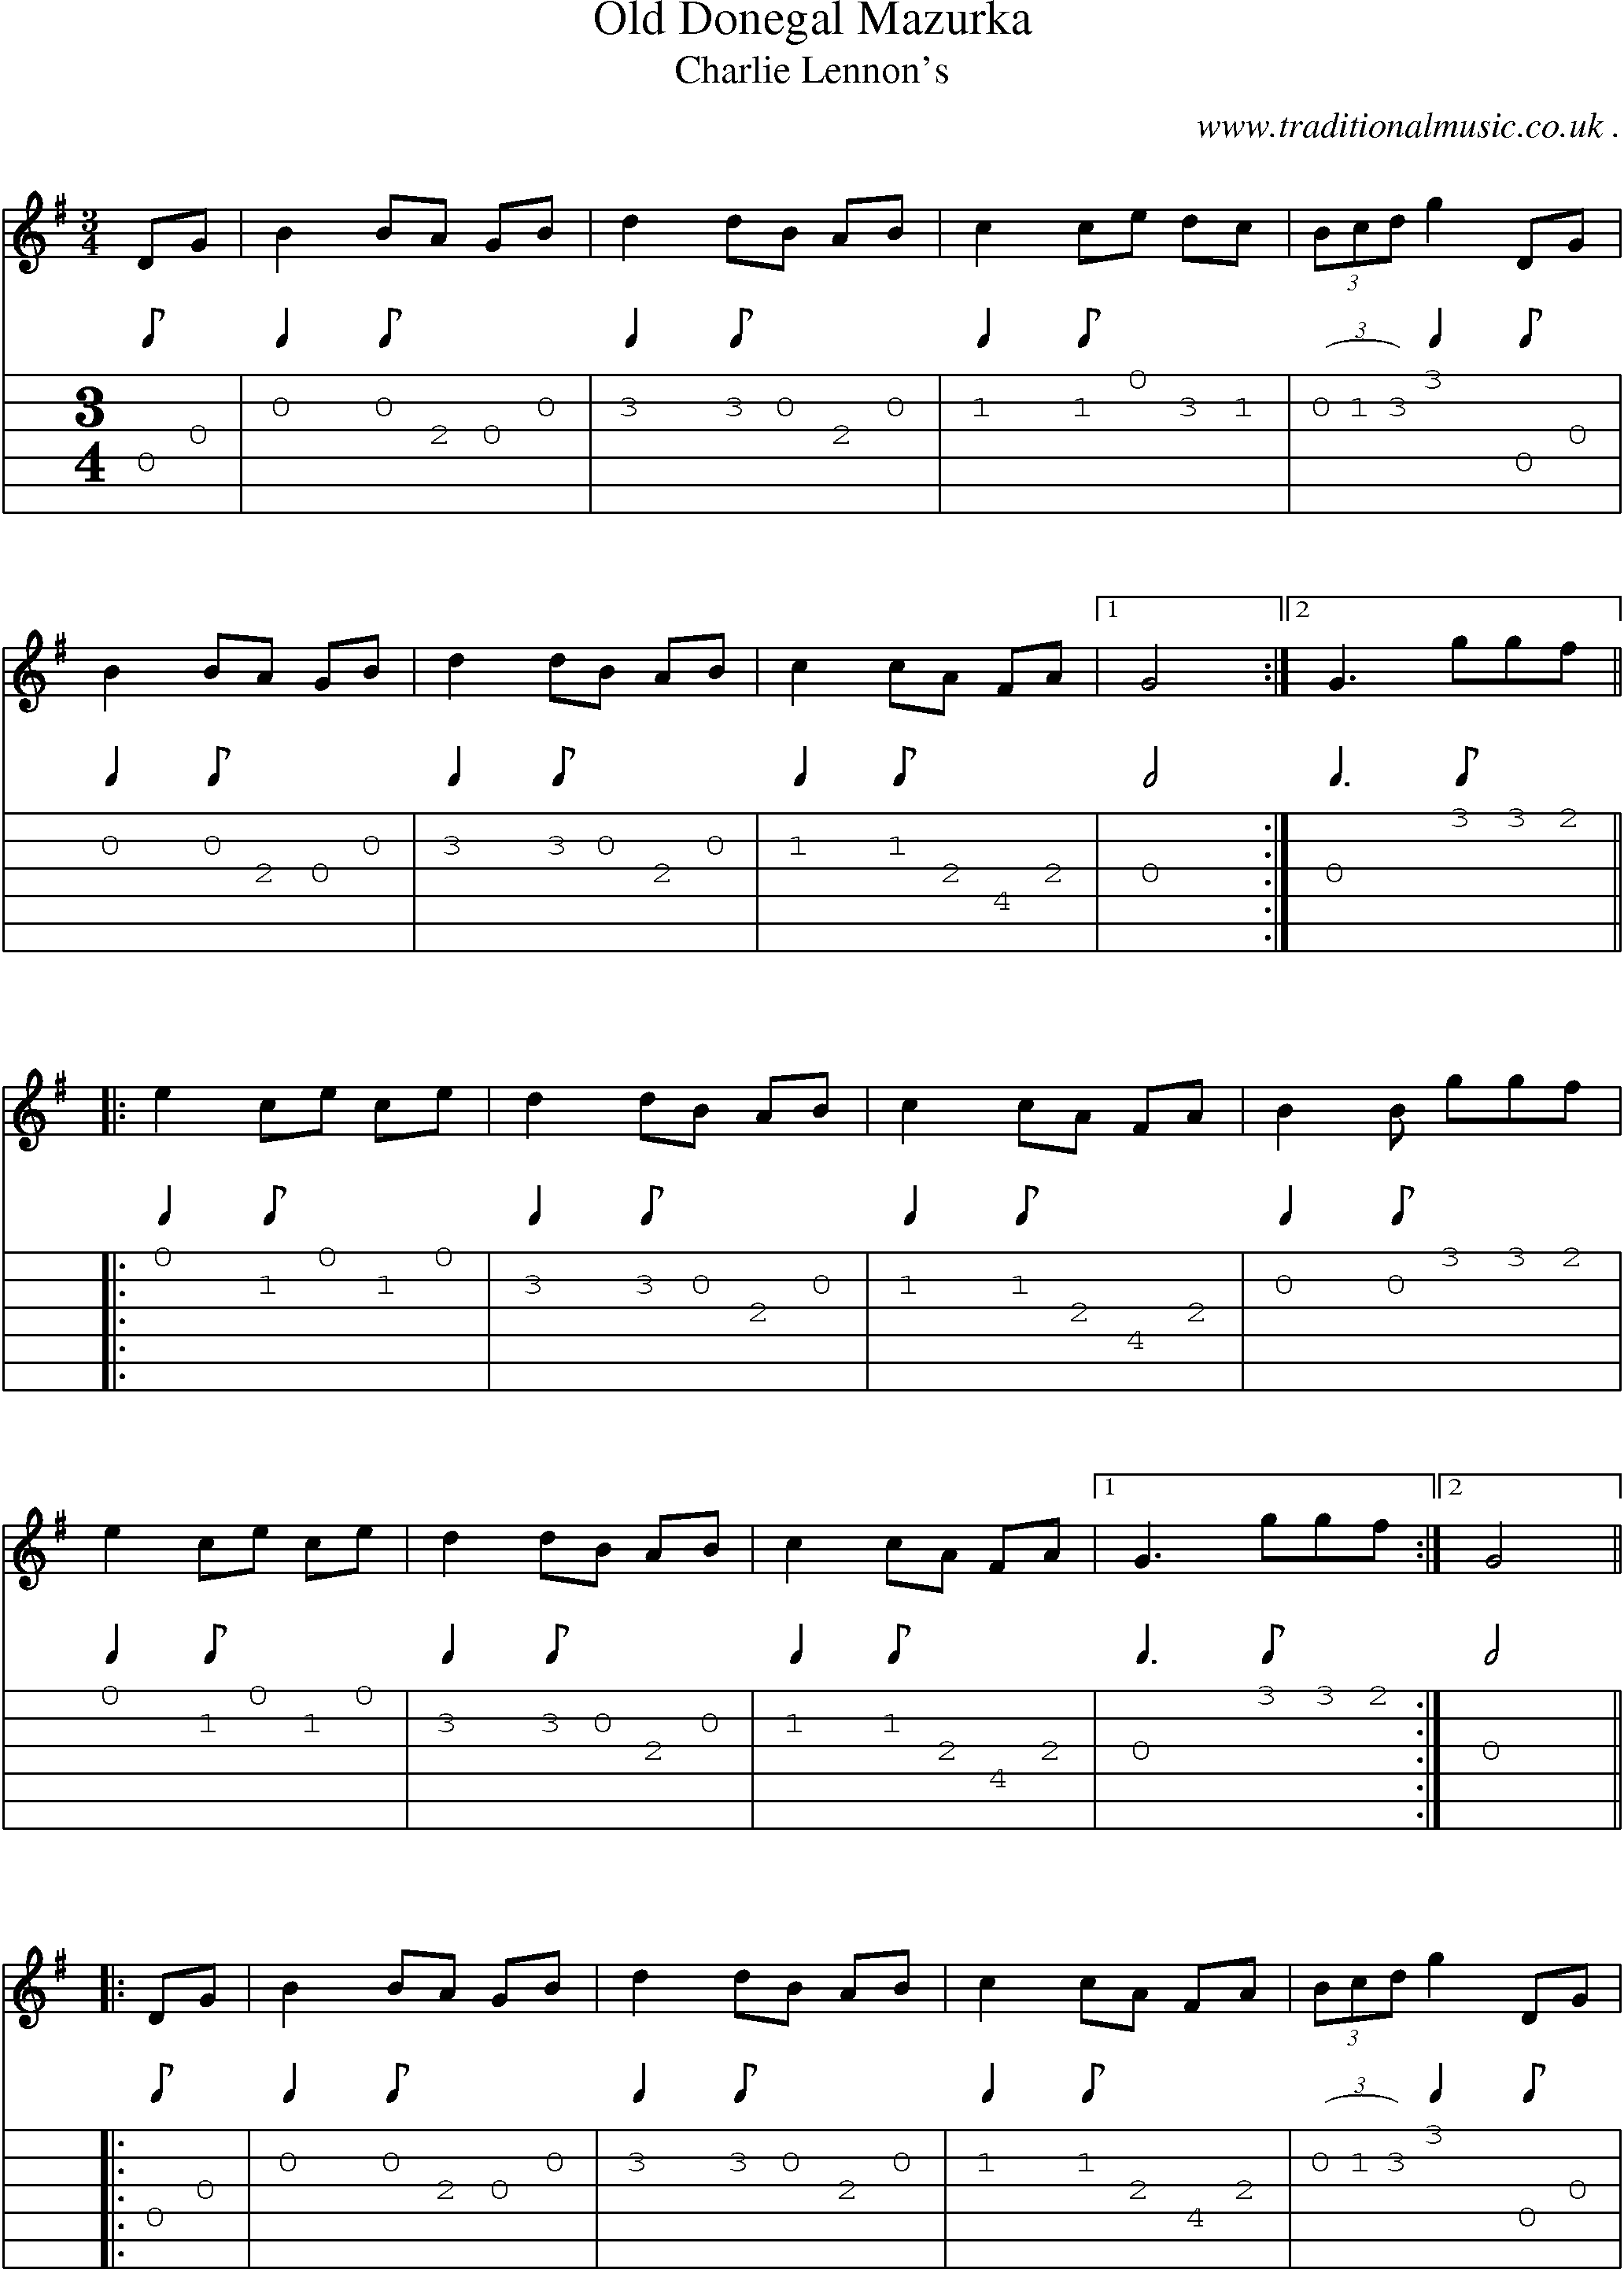 Sheet-Music and Guitar Tabs for Old Donegal Mazurka